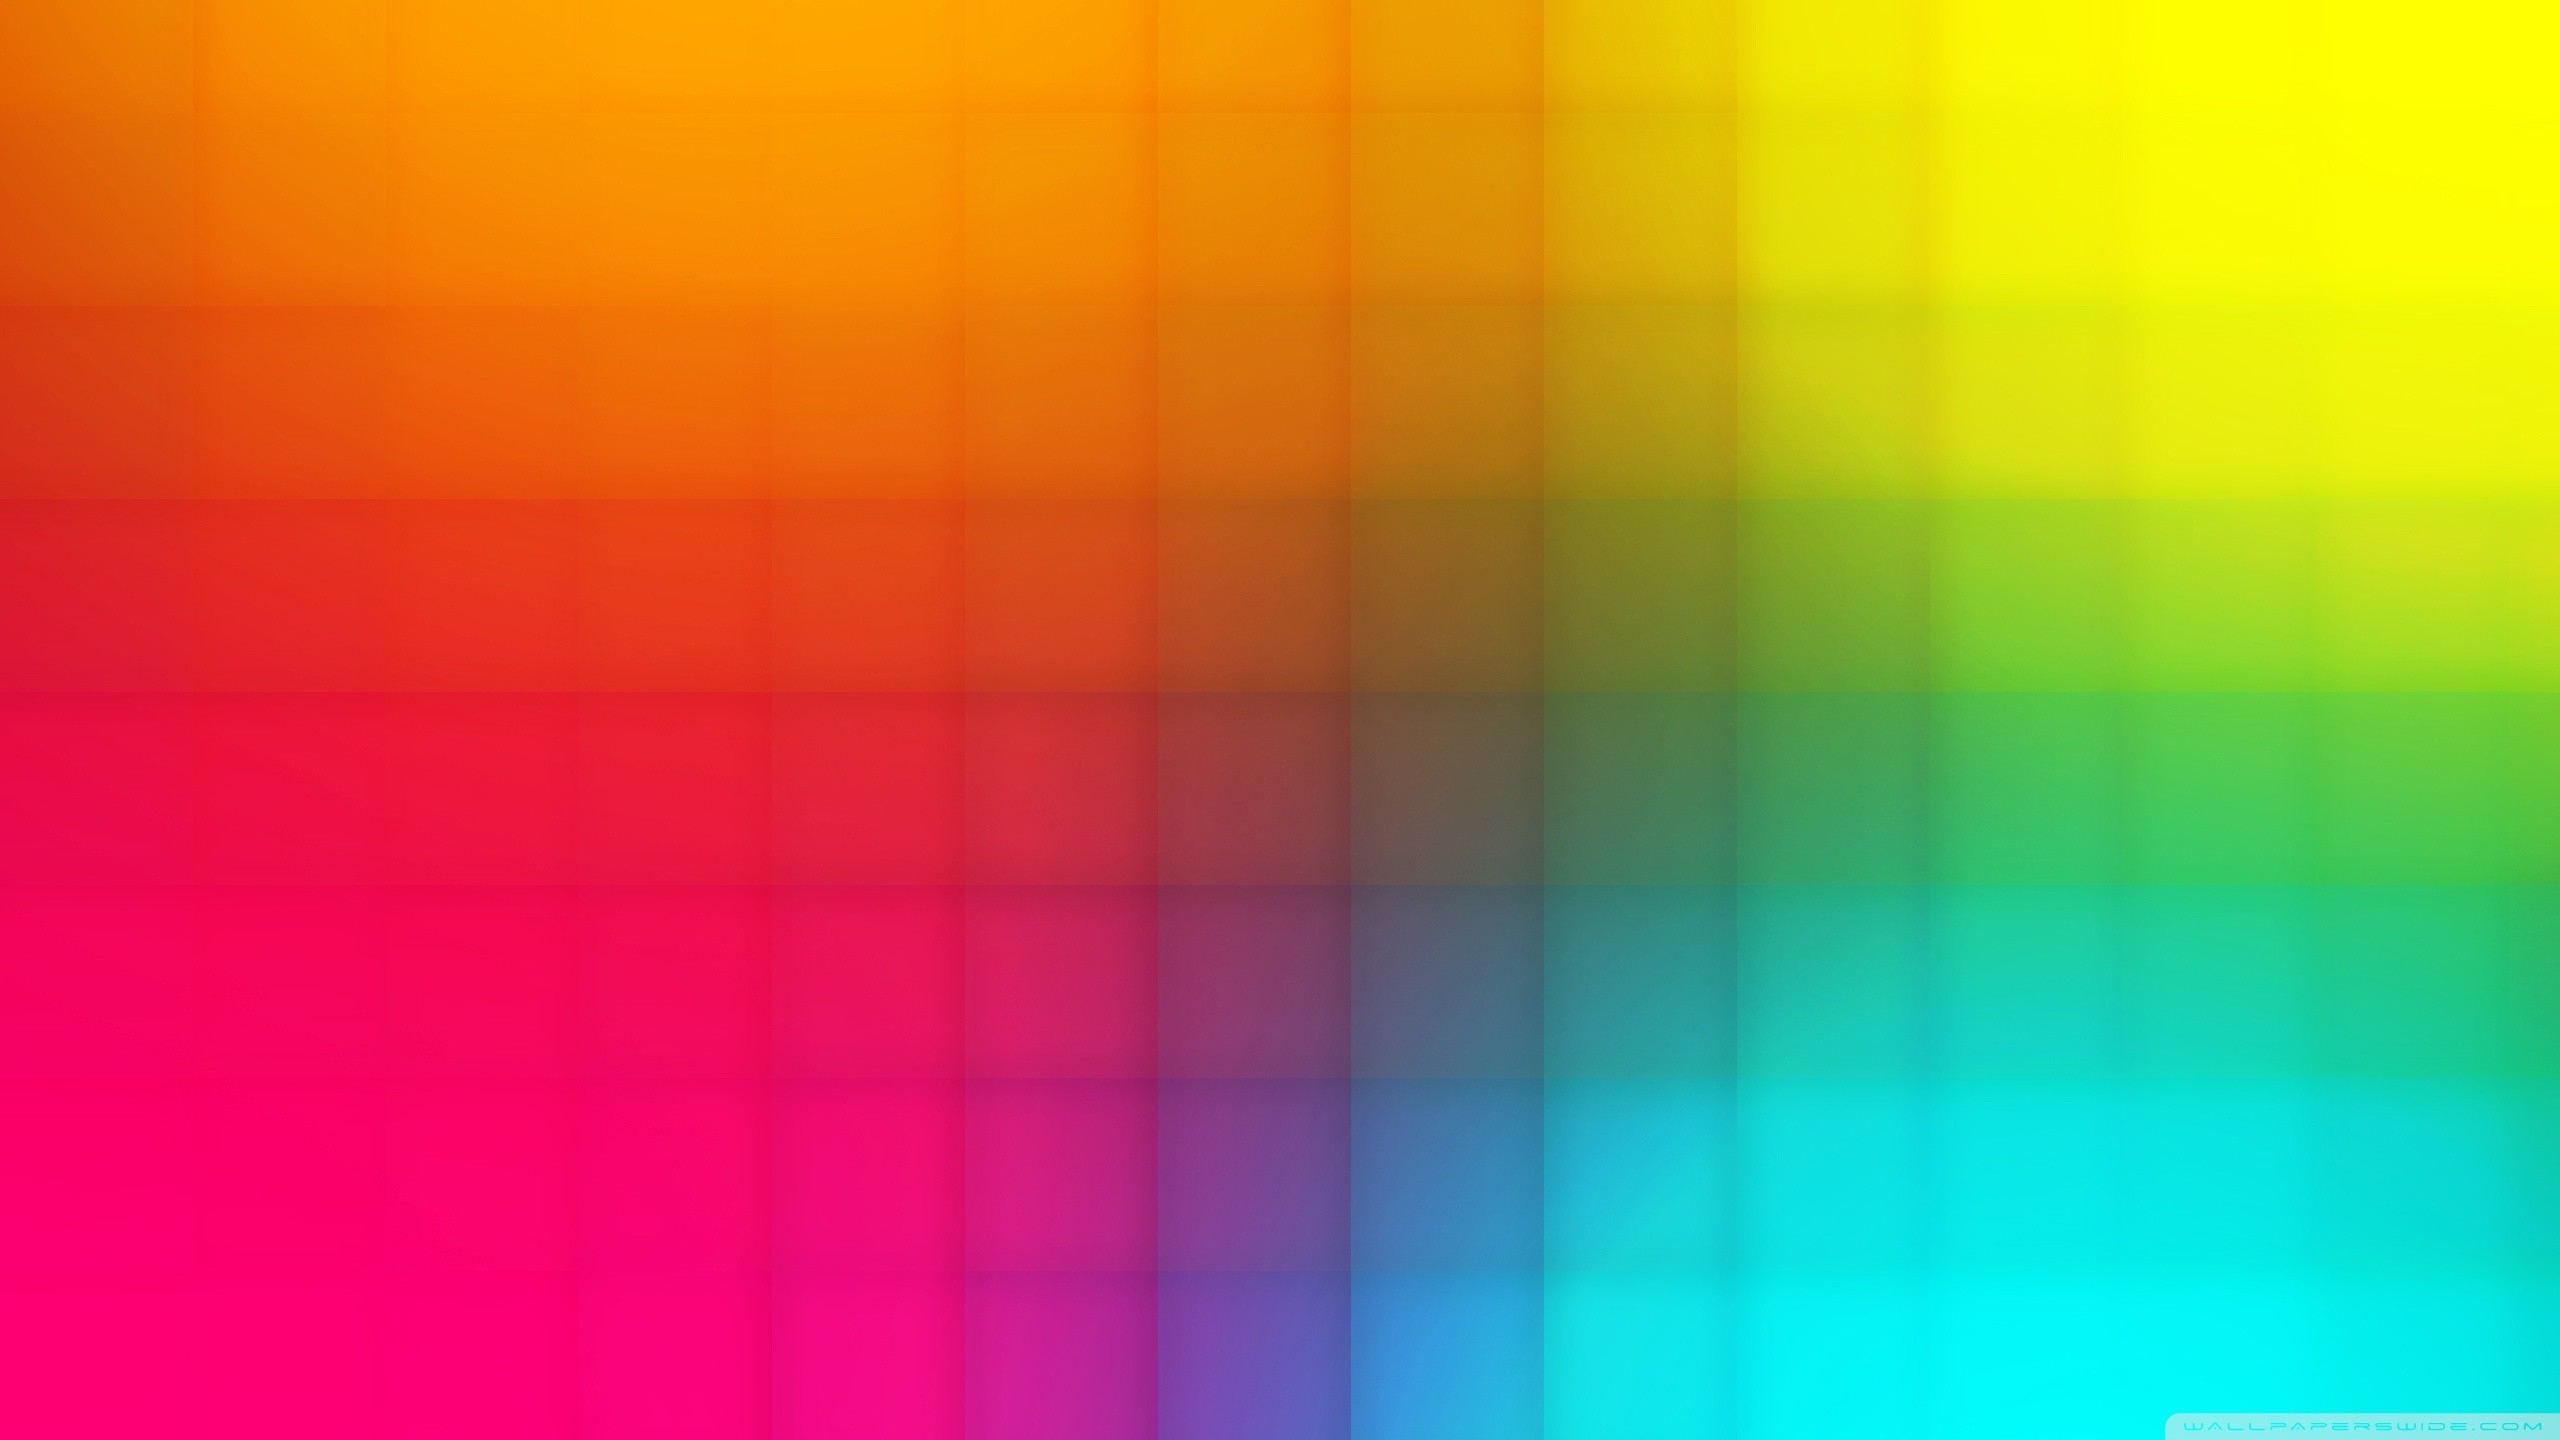 2048 pixels wide and 1152 pixels tall wallpaper,orange,green,yellow,blue,colorfulness